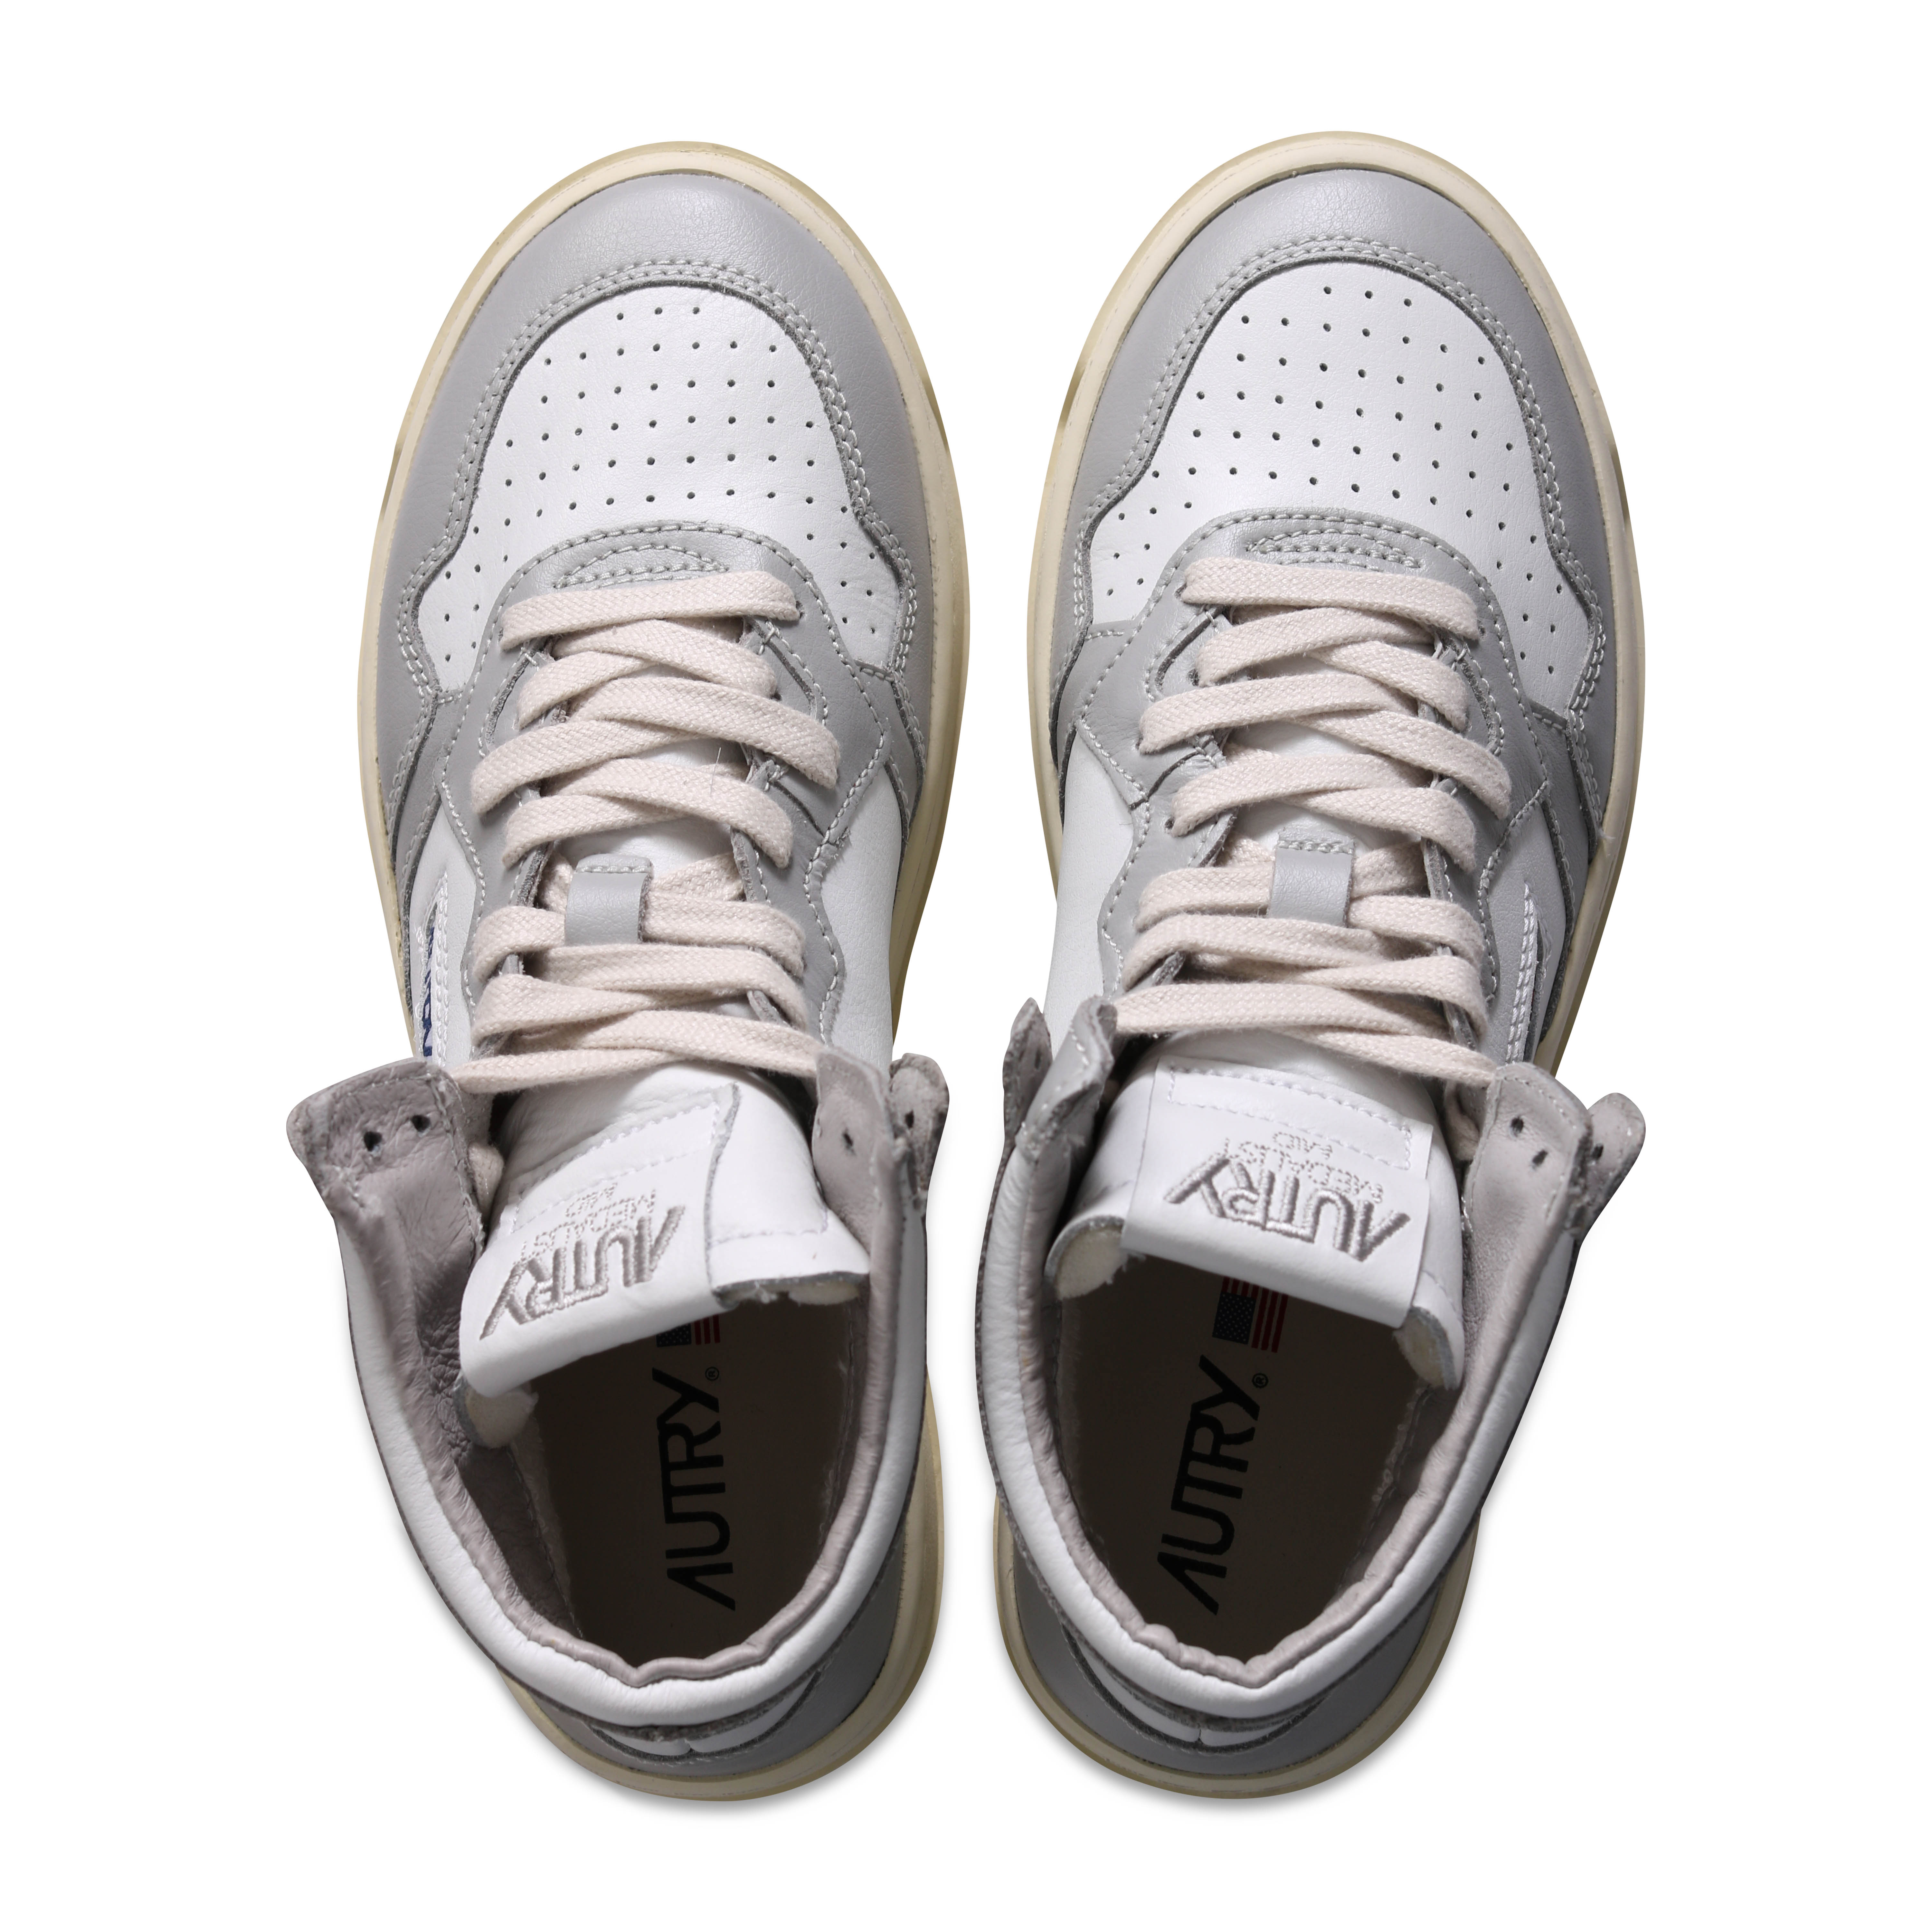 Autry Action Shoes Mid Sneaker White/Grey